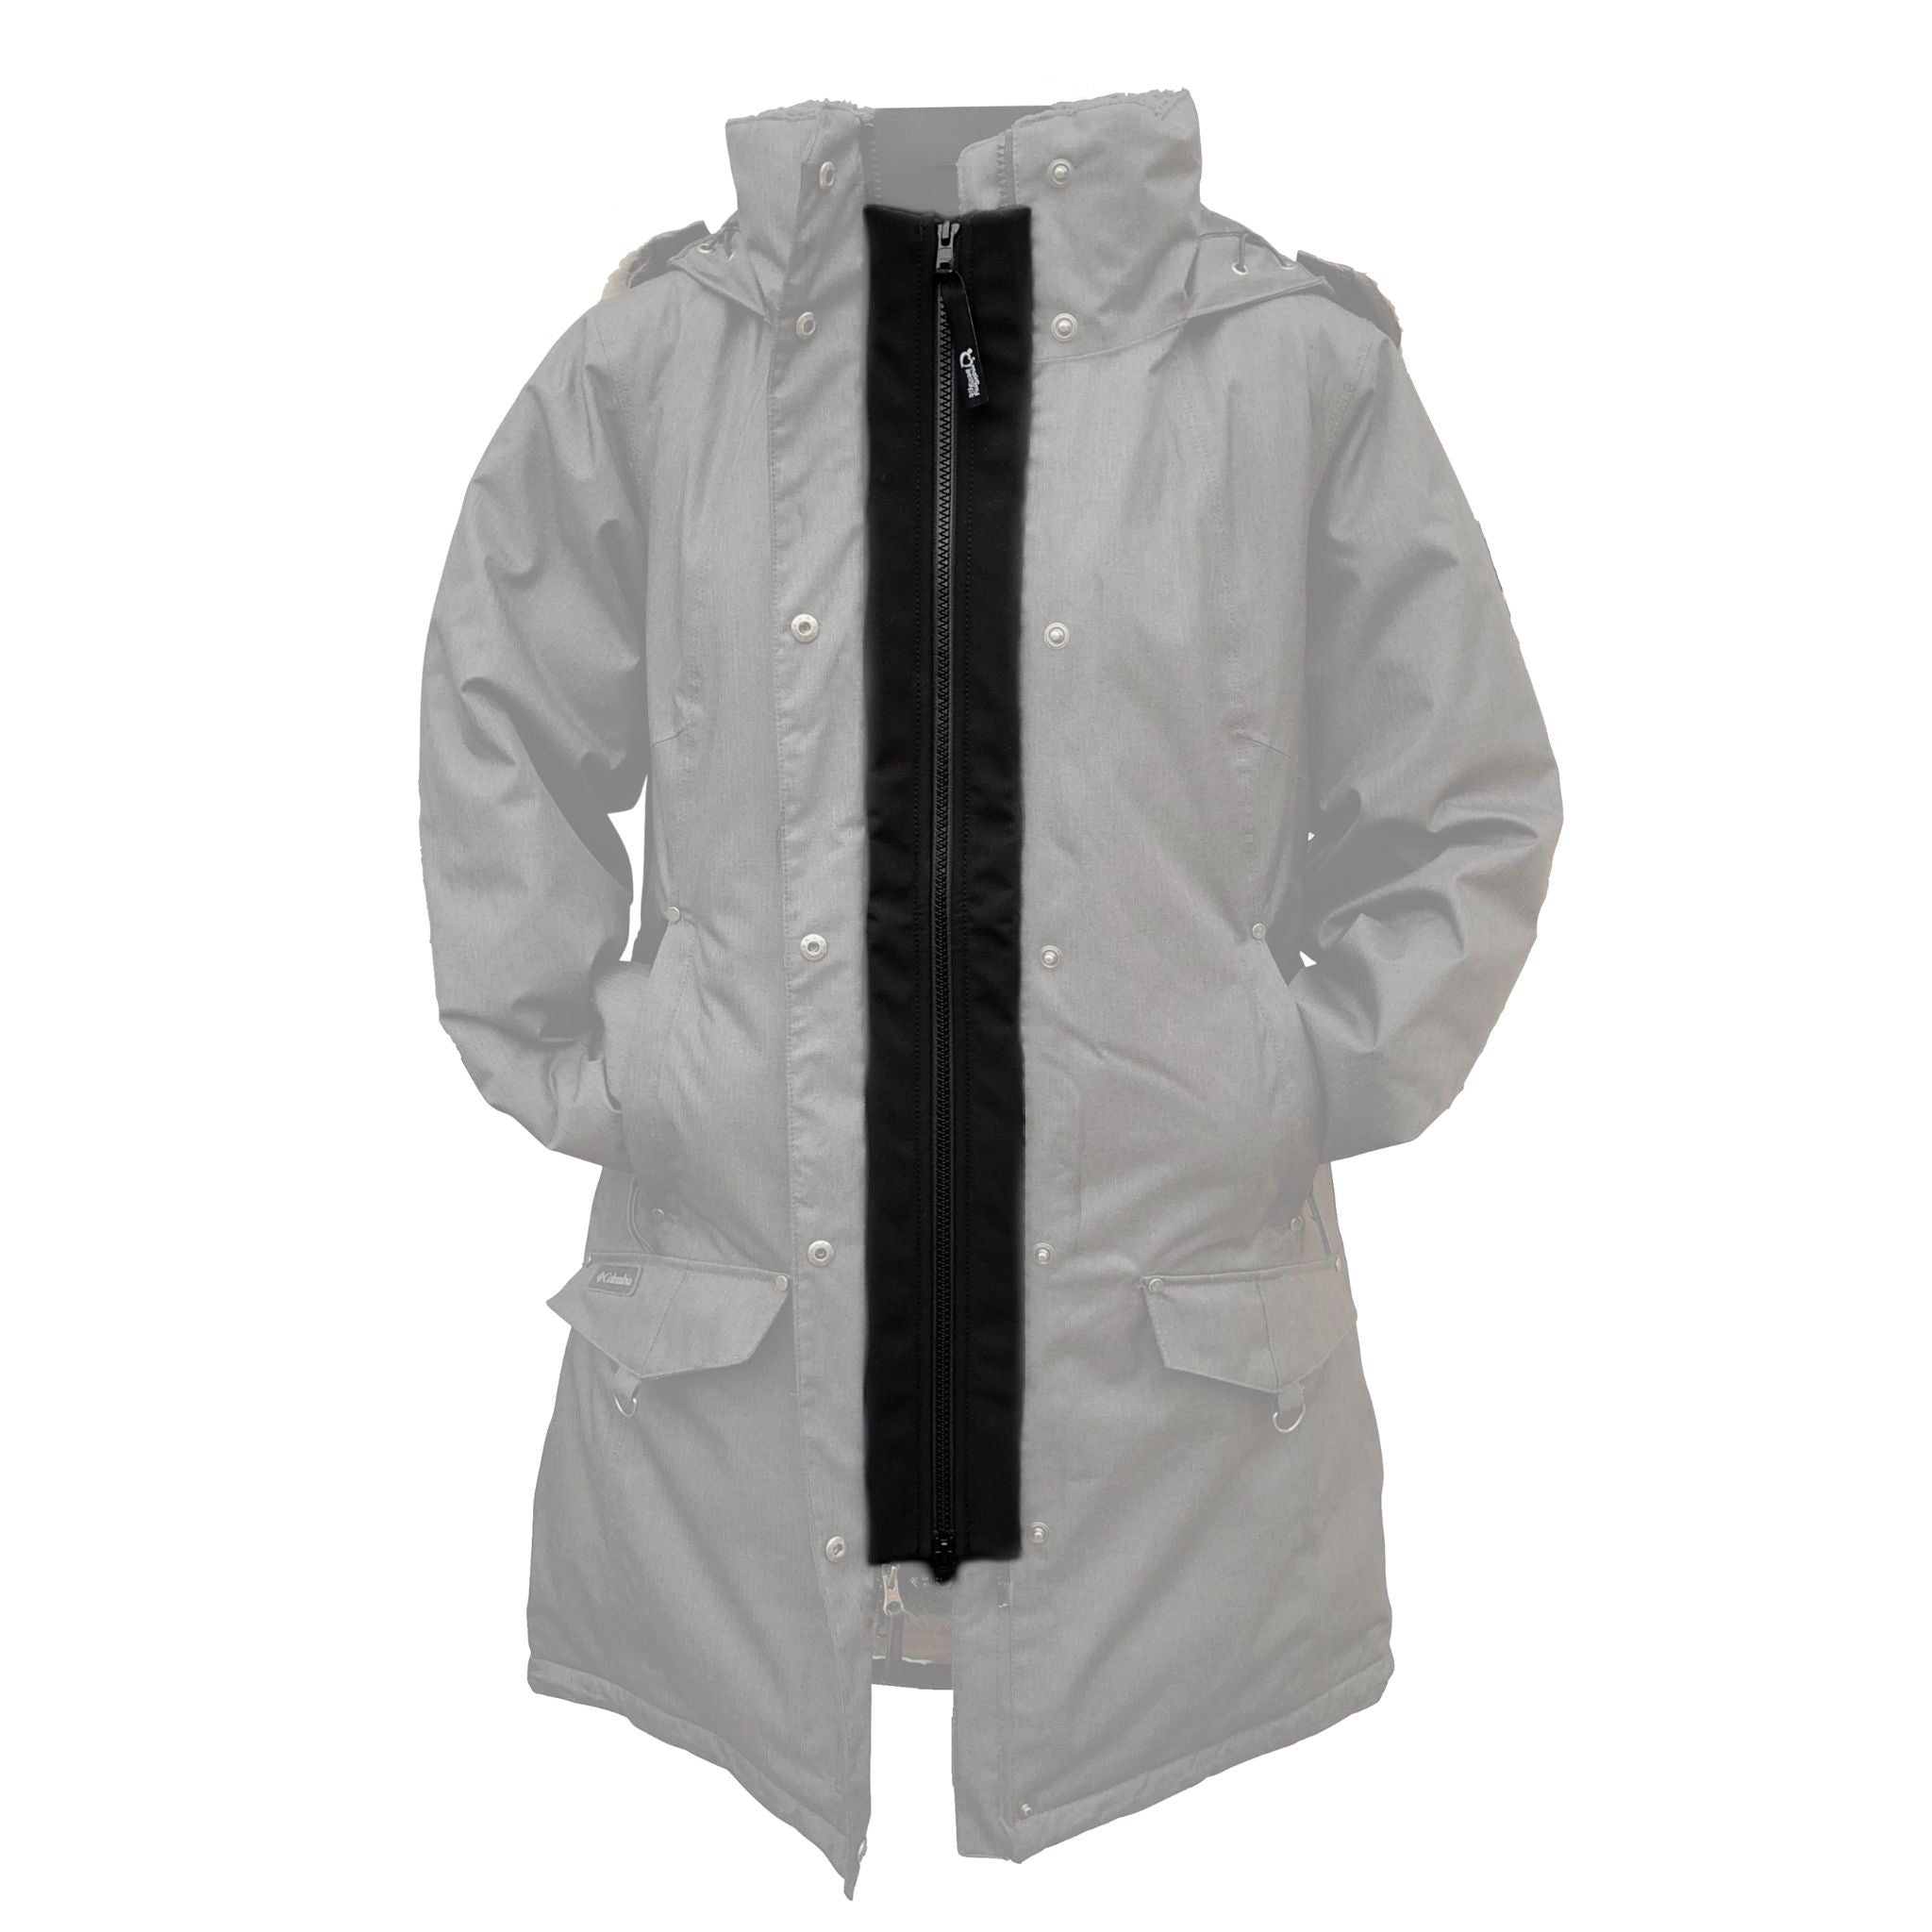 Clip-in BellyCoat Jacket Extension